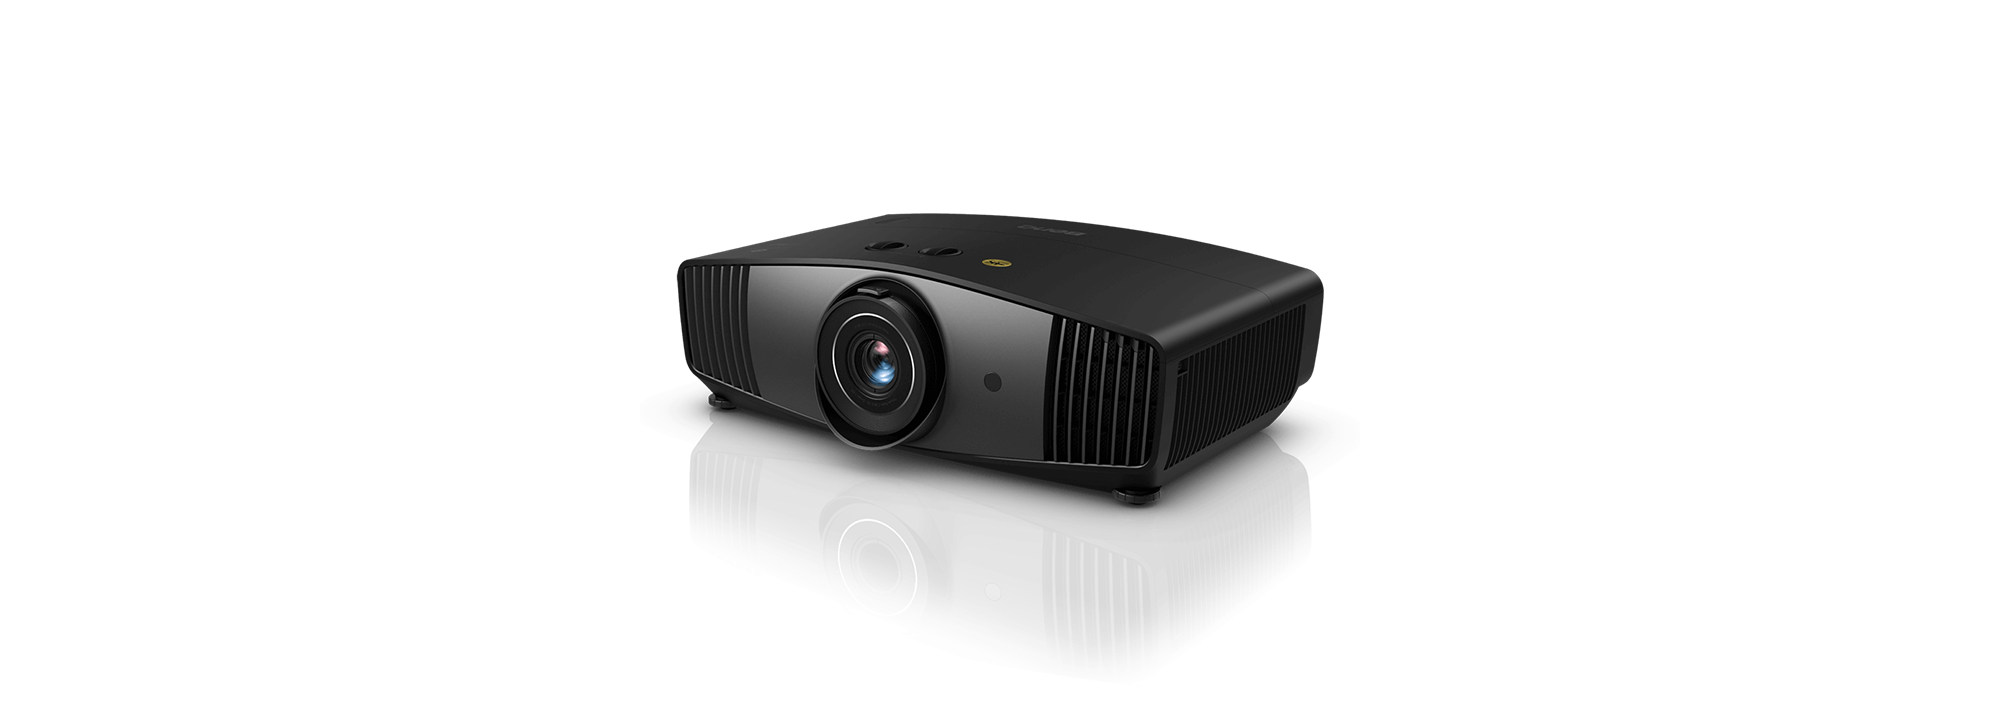 BENQ W5700 True 4K UHD Projector with 100% DCI-P3/REC.709 and HDR-PRO